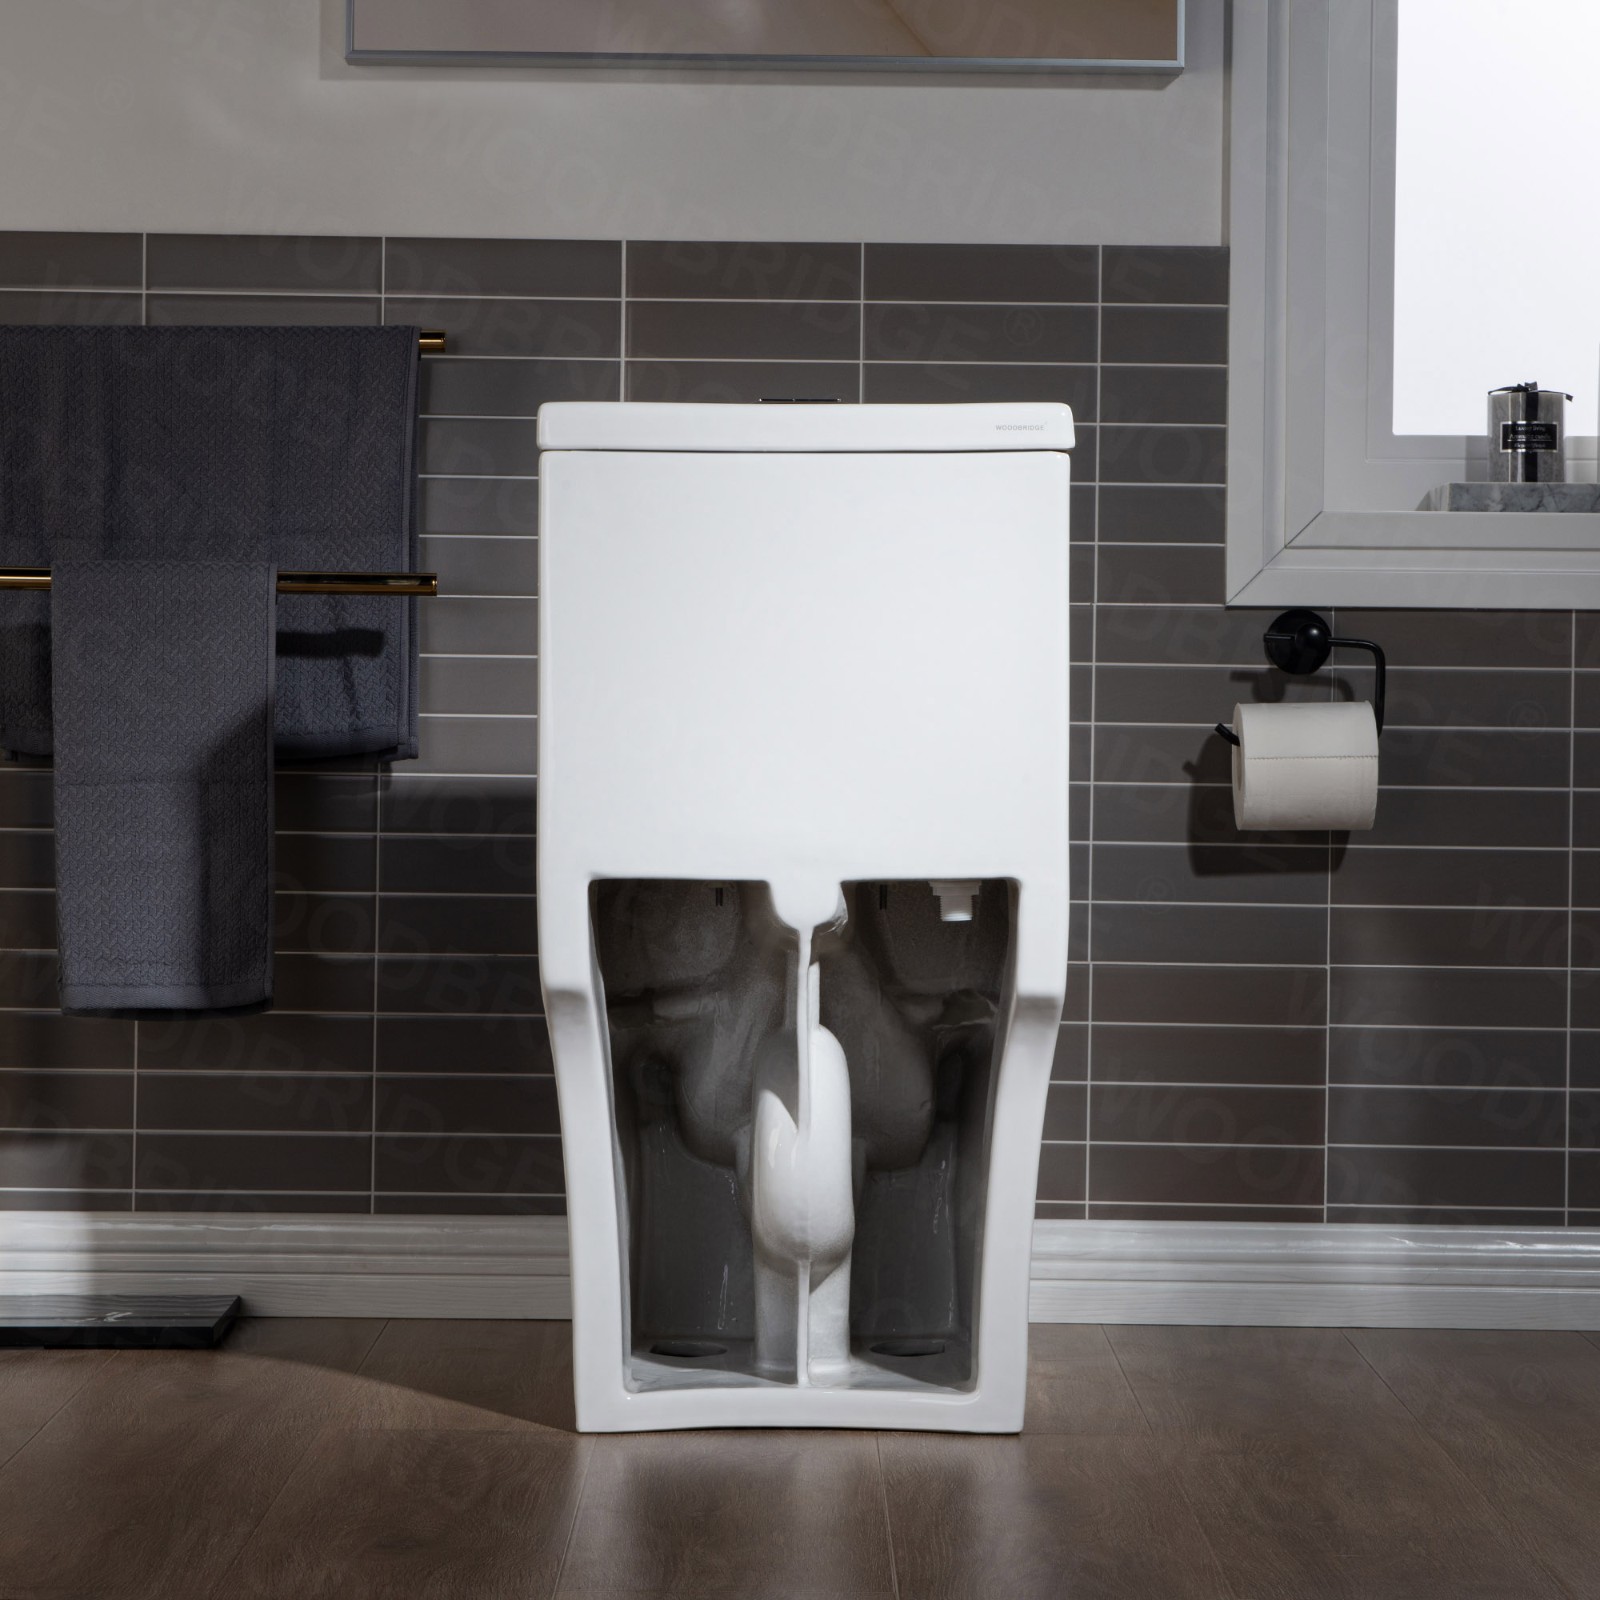  WOODBRIDGE B-0500-A Modern One-Piece Elongated toilet with Solf Closed Seat and Hand Free Touchless Sensor Flush Kit, White_5491